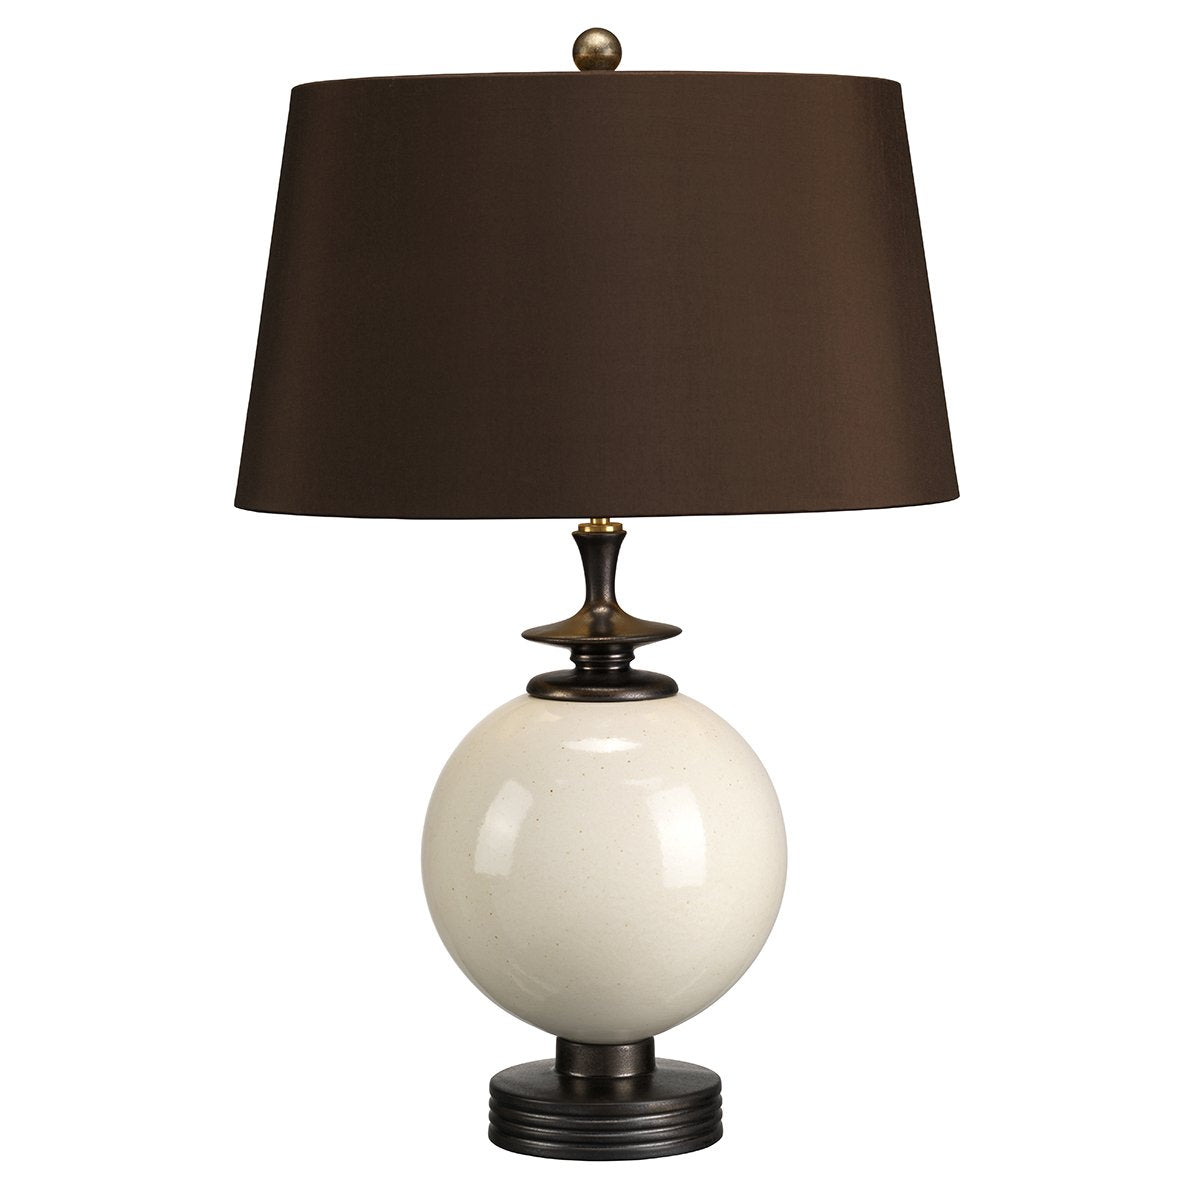 Colindale Orb Table Lamp c/w Shade - ID 8331